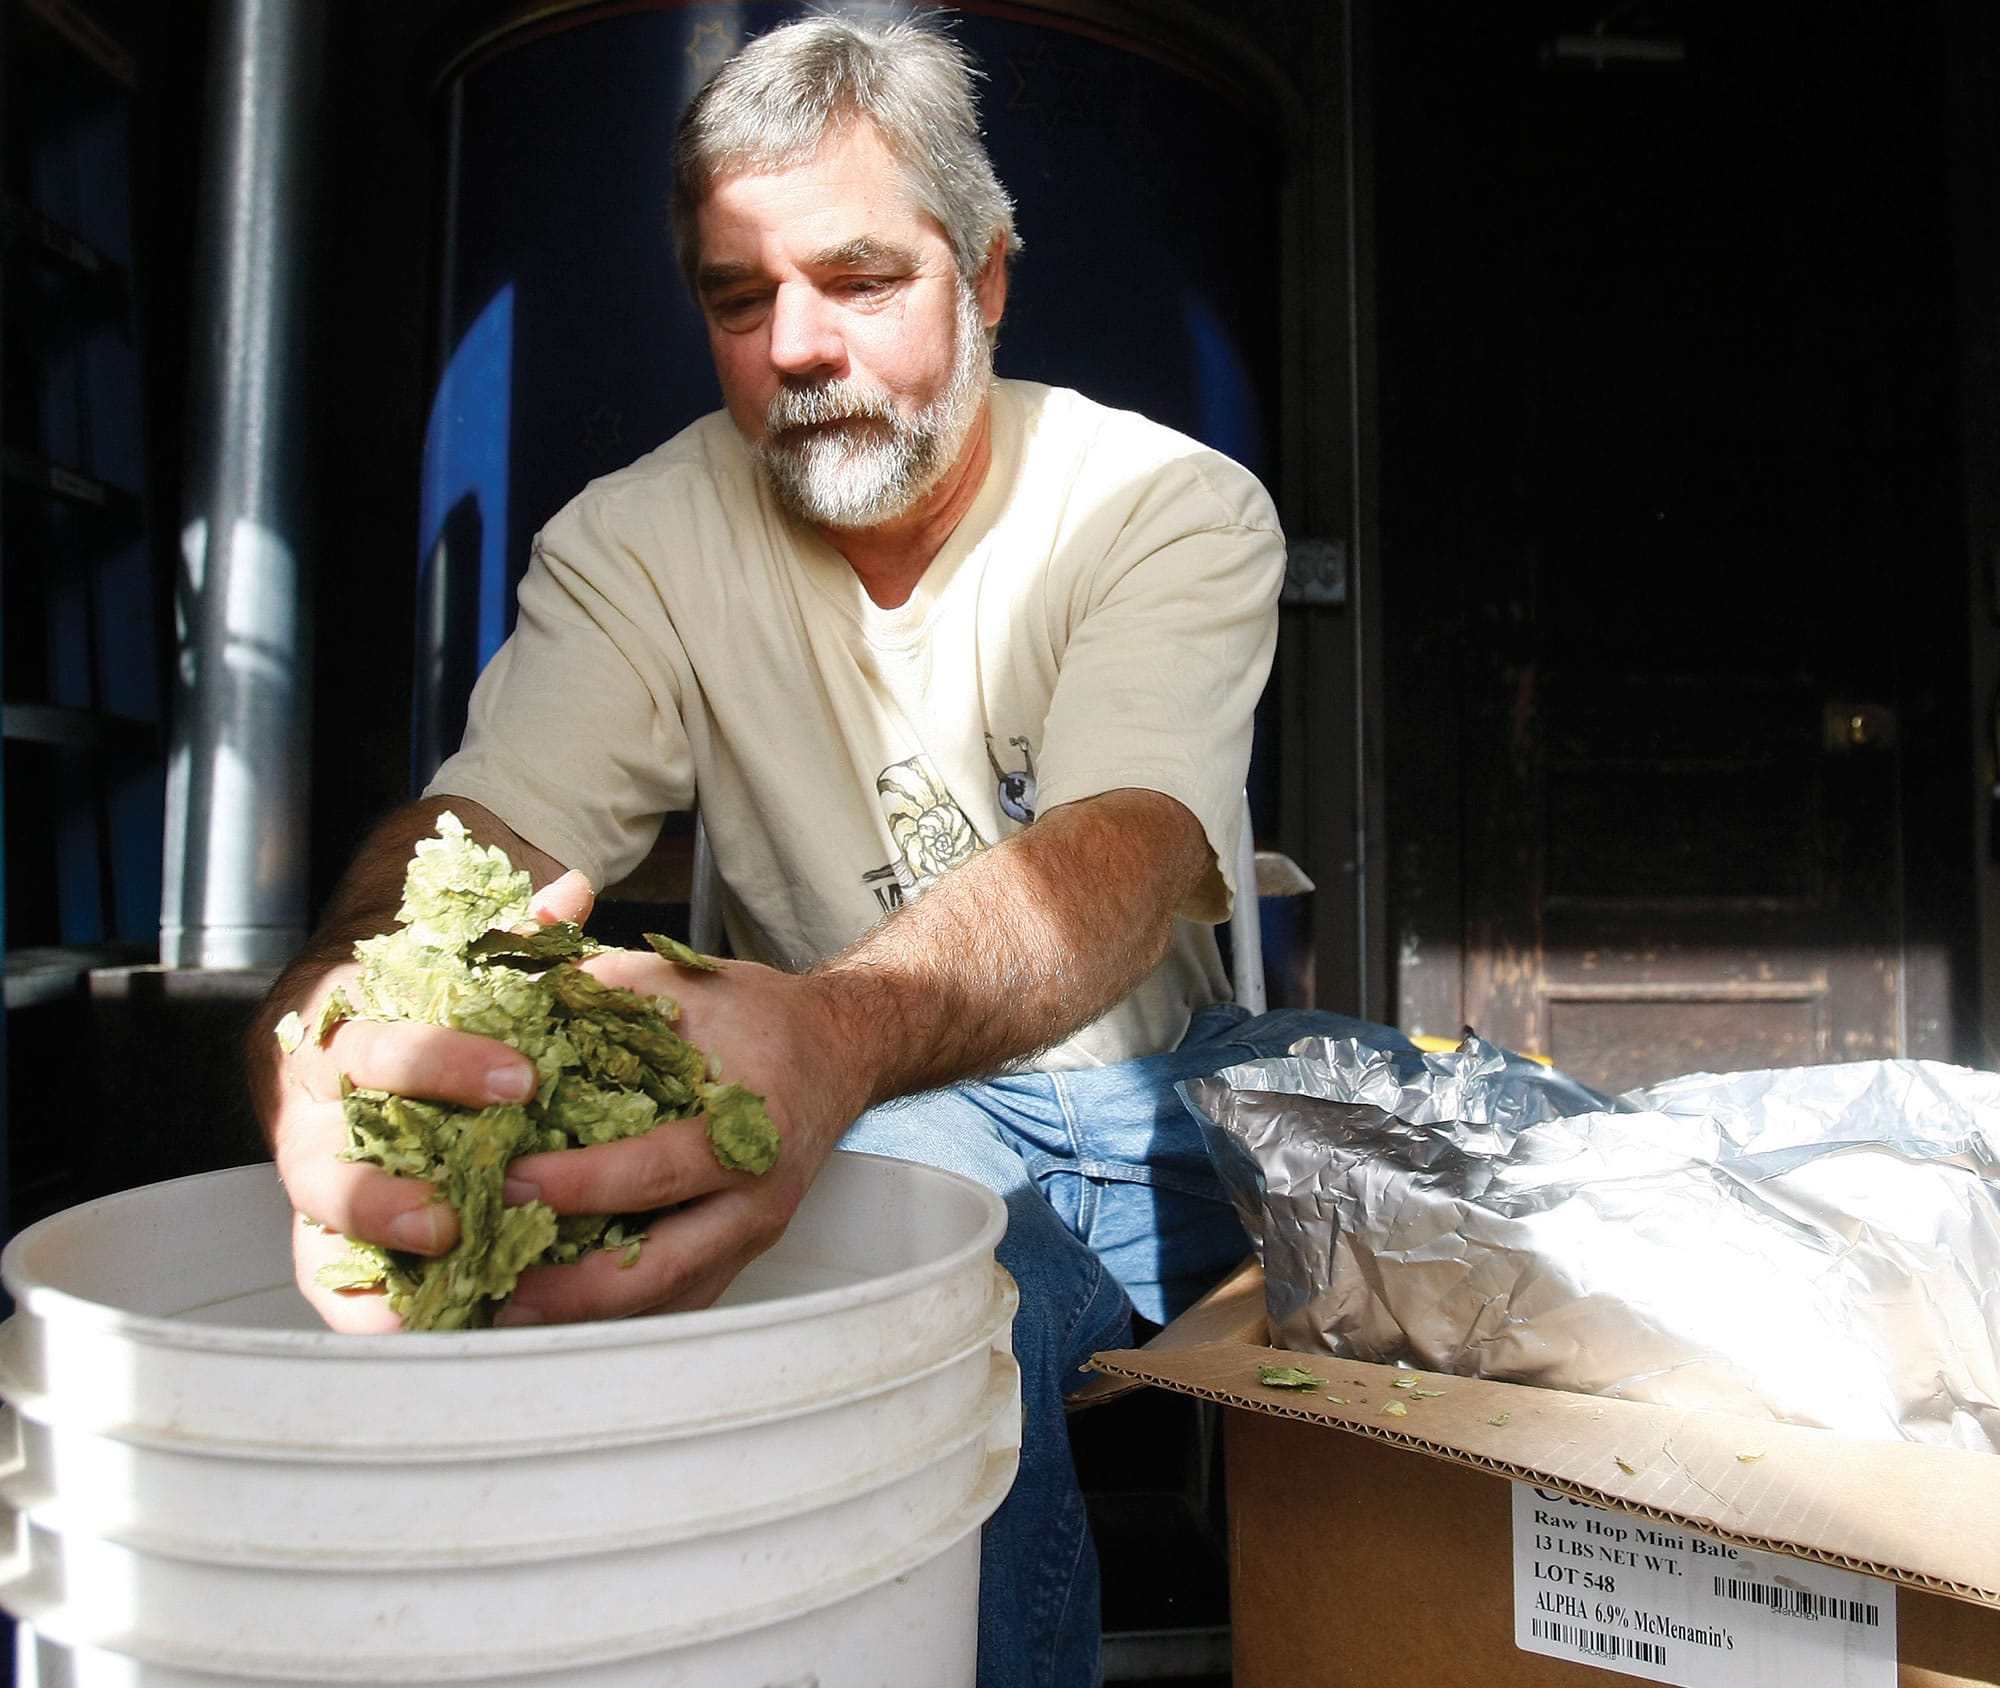 Roseburg Station Pub and Brewery head brewer Tom Johnson measures out hops at the brewery in Roseburg, Ore.